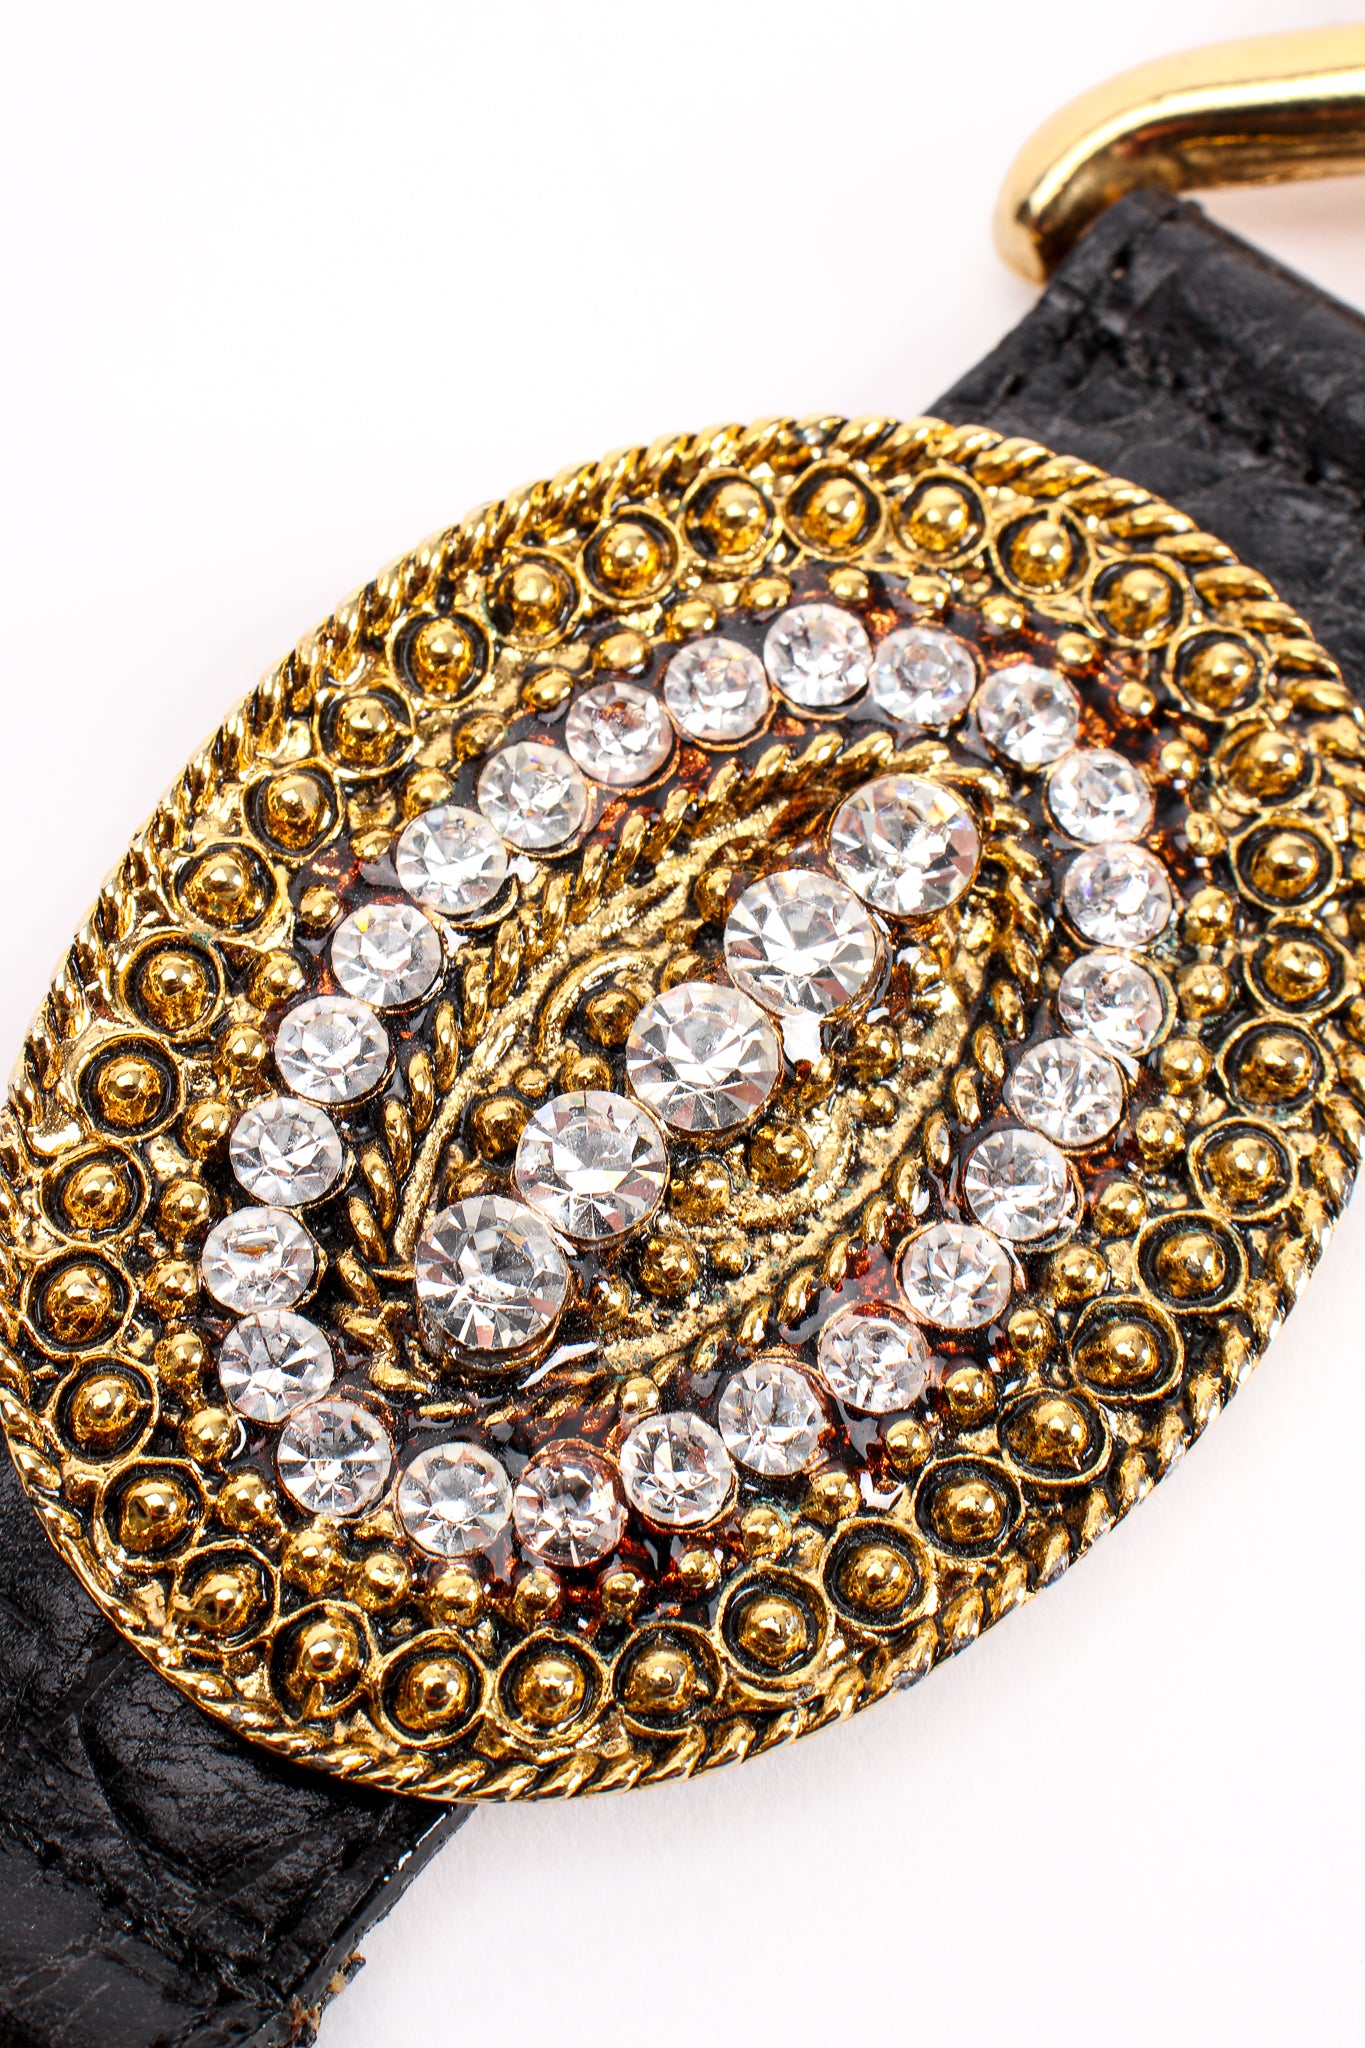 Vintage Streets Ahead Rhinestone Medallion Draped Chain Leather Belt detail at Recess Los Angeles